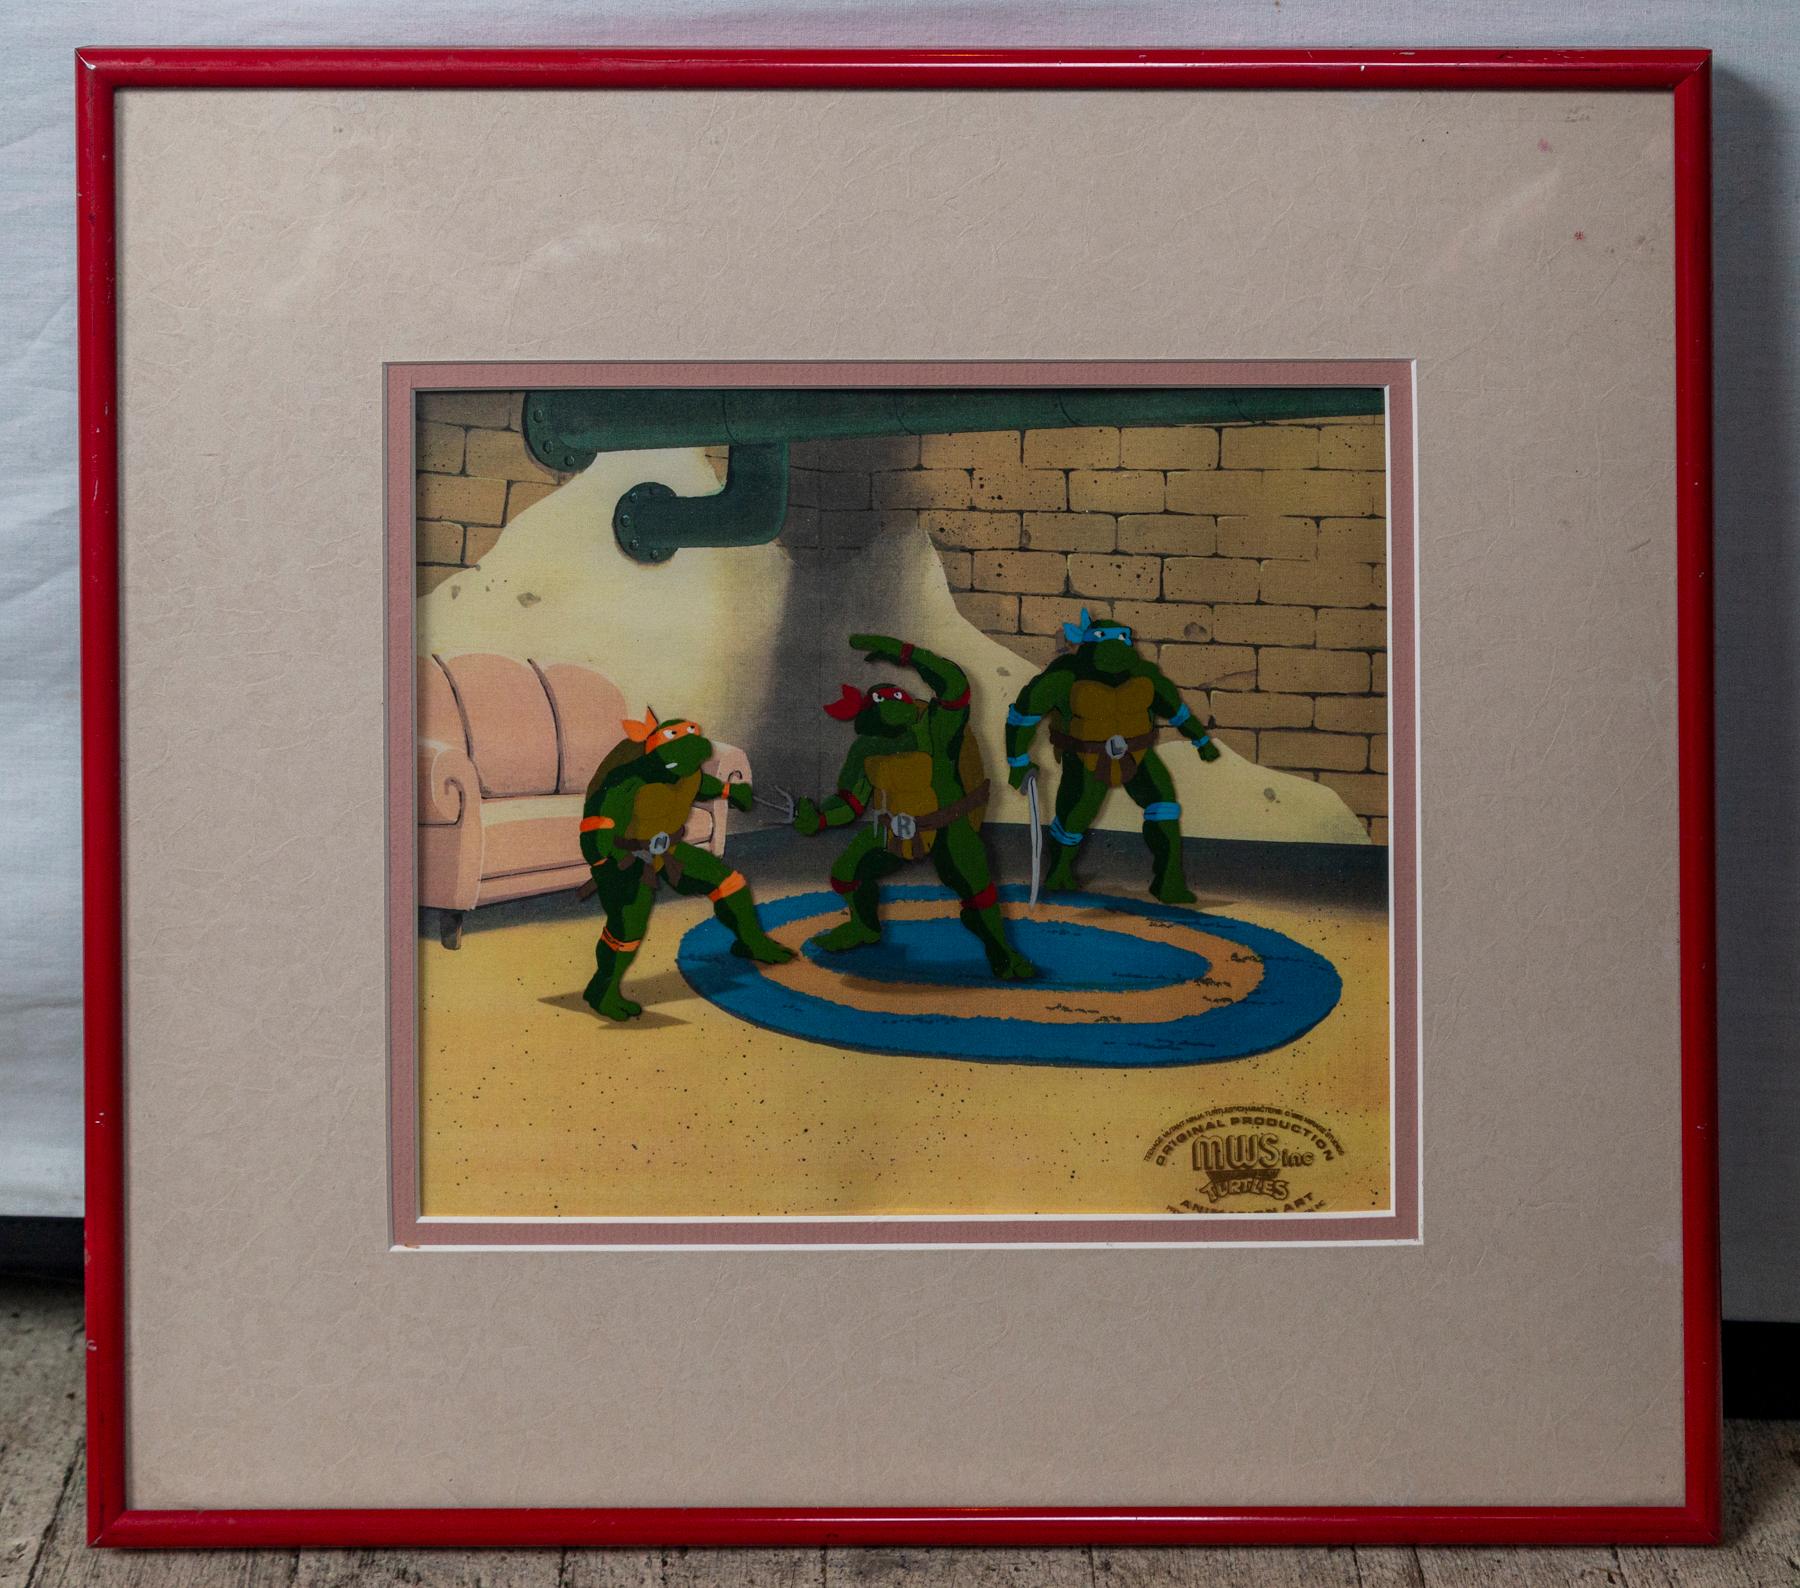 *Please note that each is sold separately and the shipping estimate is subject to change*
All three of the  Disney Cels  have been sold.

This first, here listed at $900 is signed by Bruce McAlsiter, of Grumpy and Doc, numbered 173/175 lower leftand